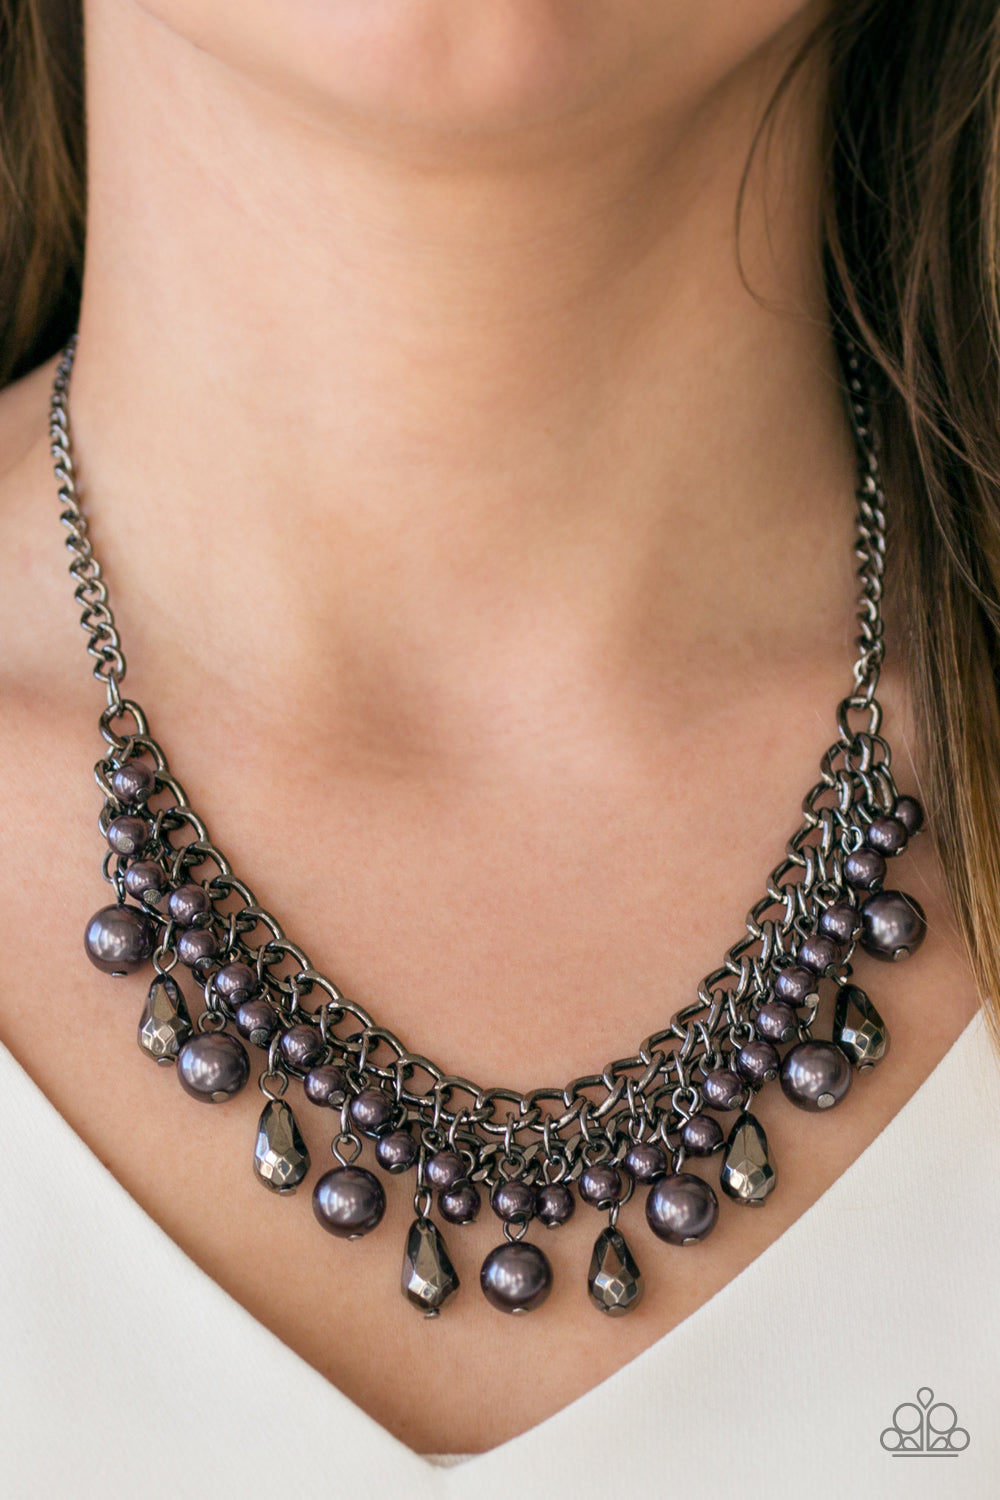 Paparazzi Accessories  - Imperial Idol - #N170 Black Necklace